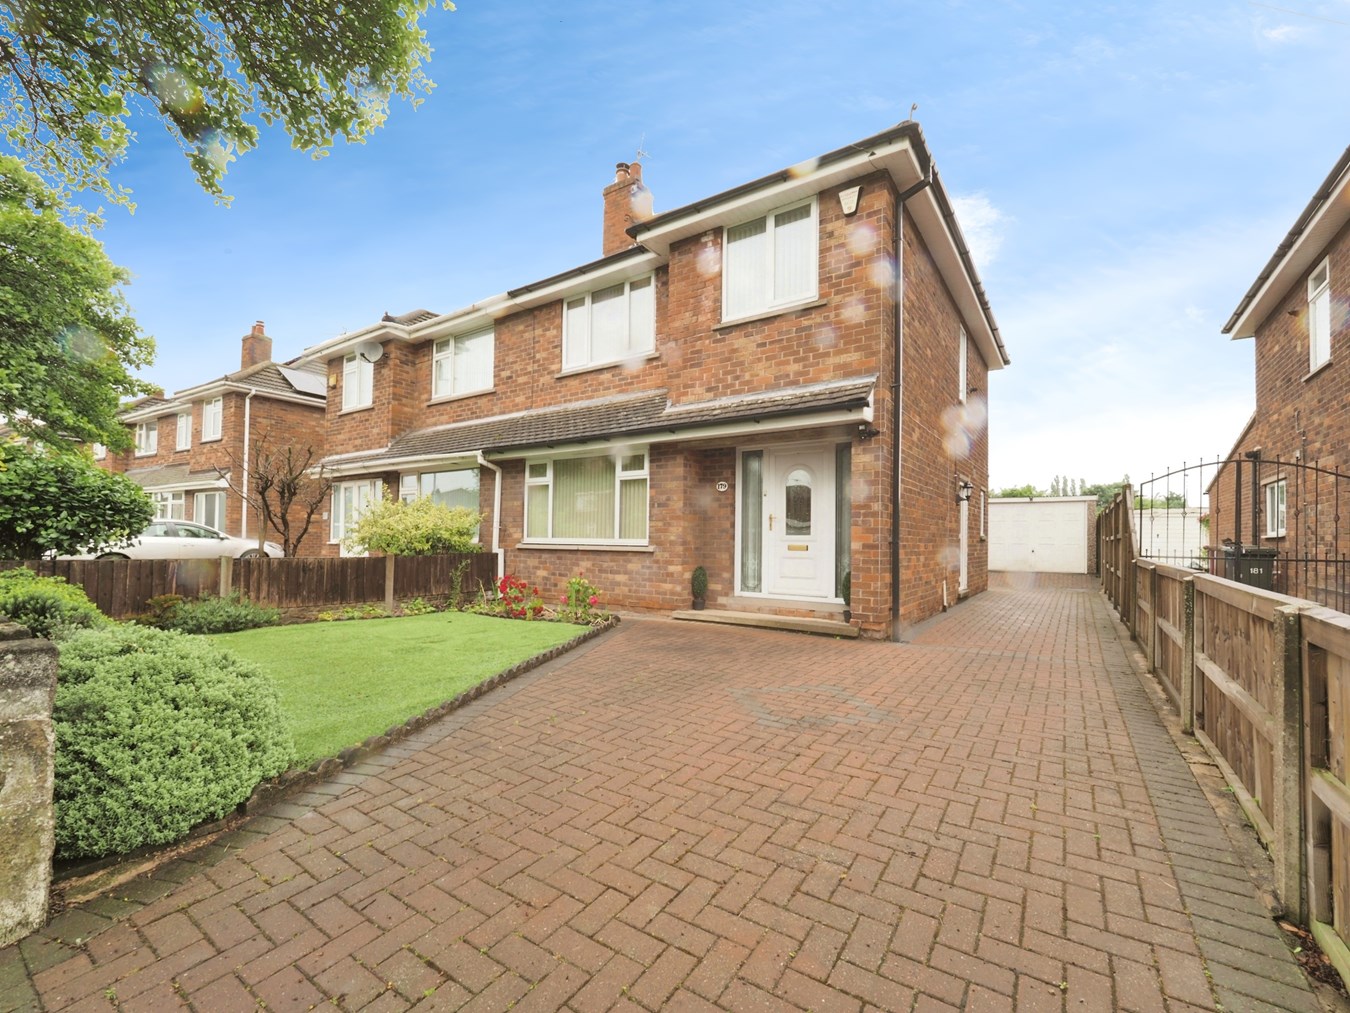 Willoughby Road, Scunthorpe, DN17